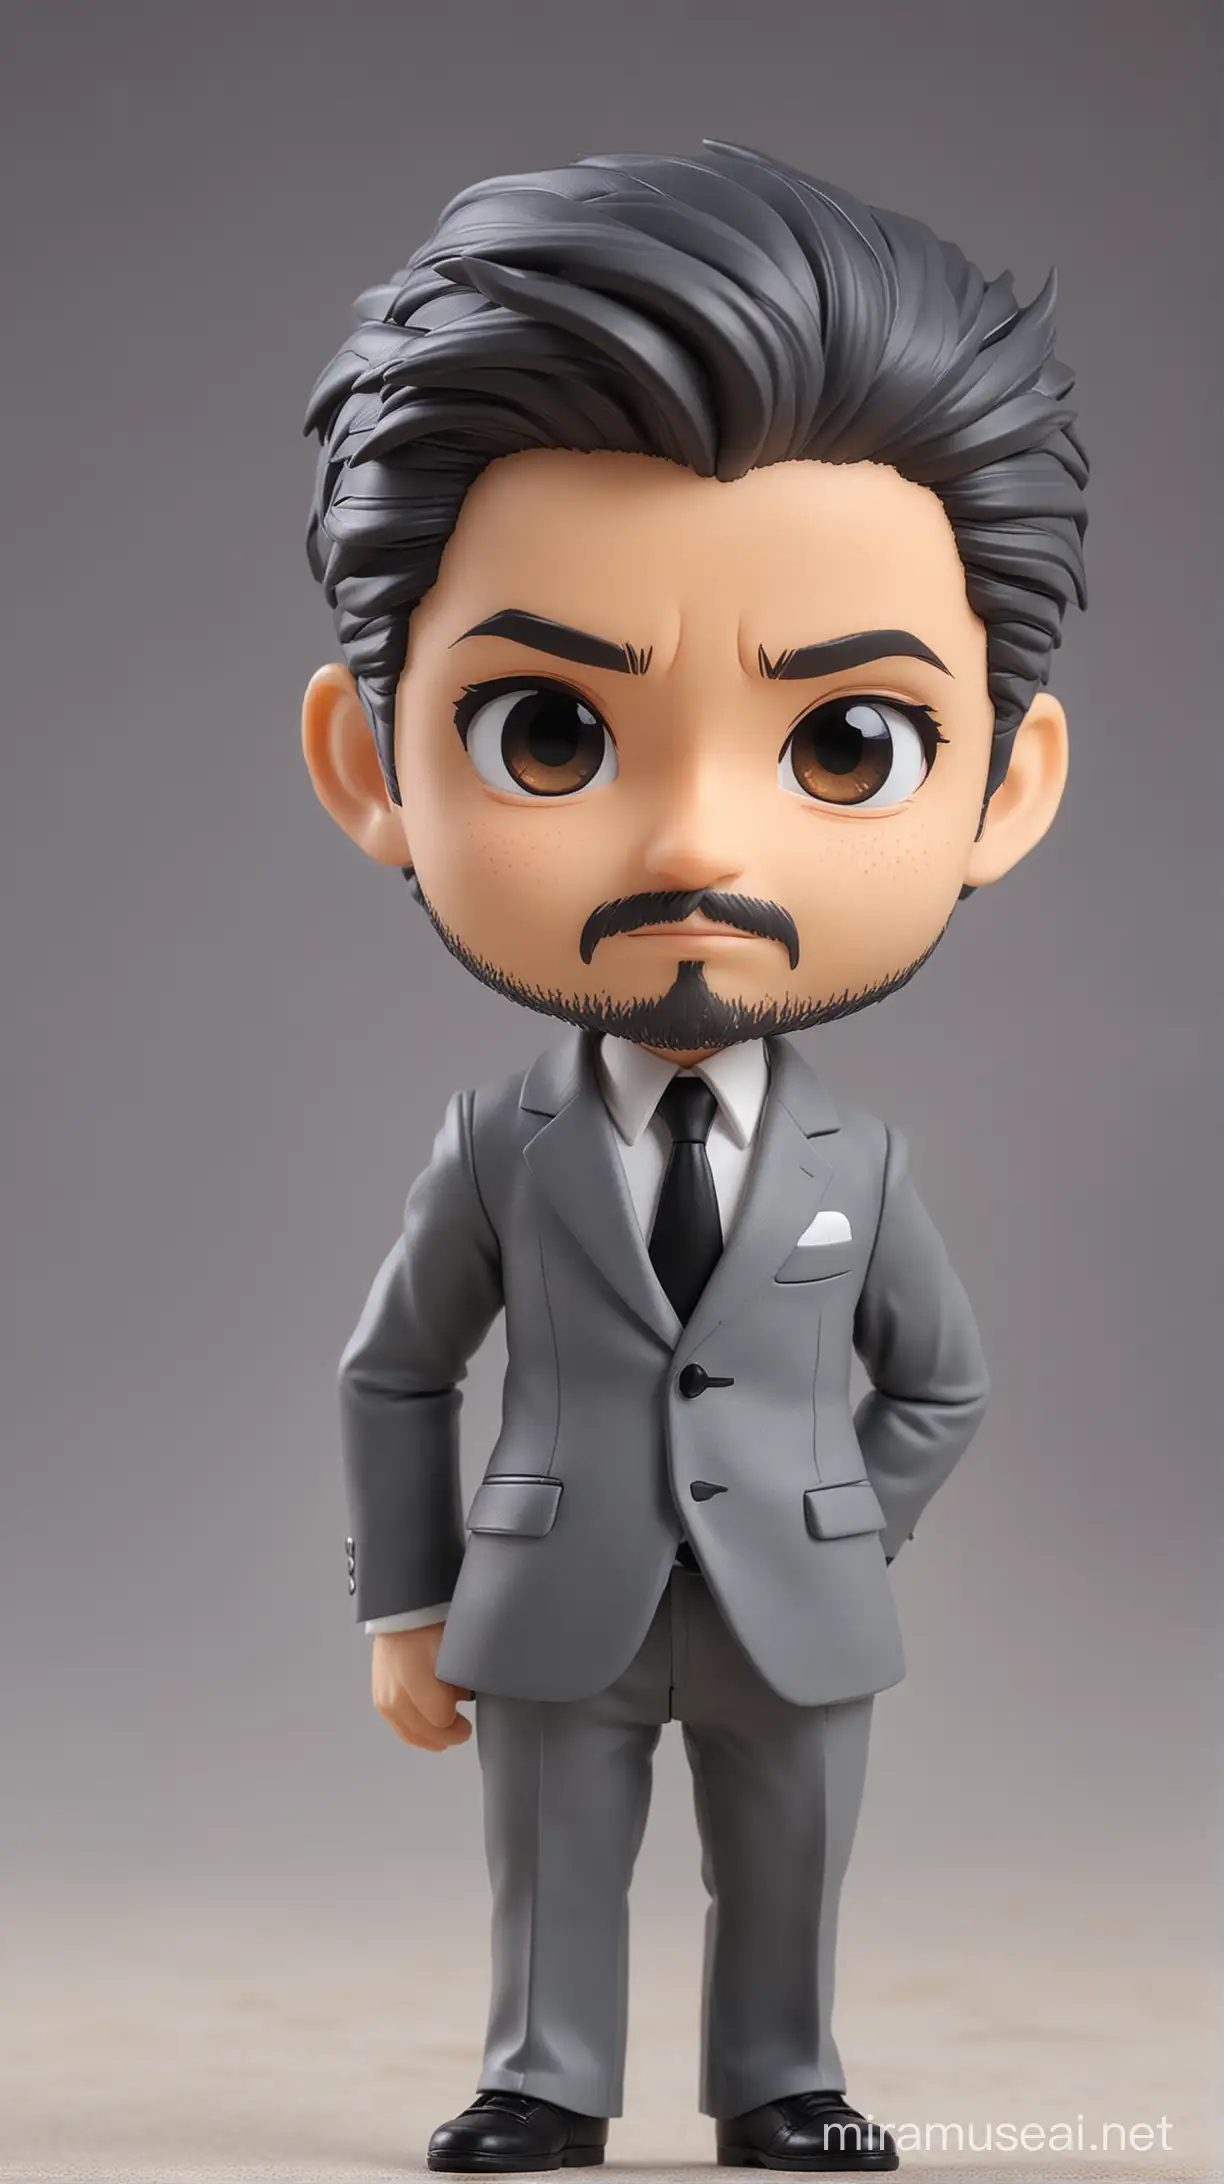 create a chibi Nendoroid version of Paco Plaza (Spanish film director) wearing a gray suit